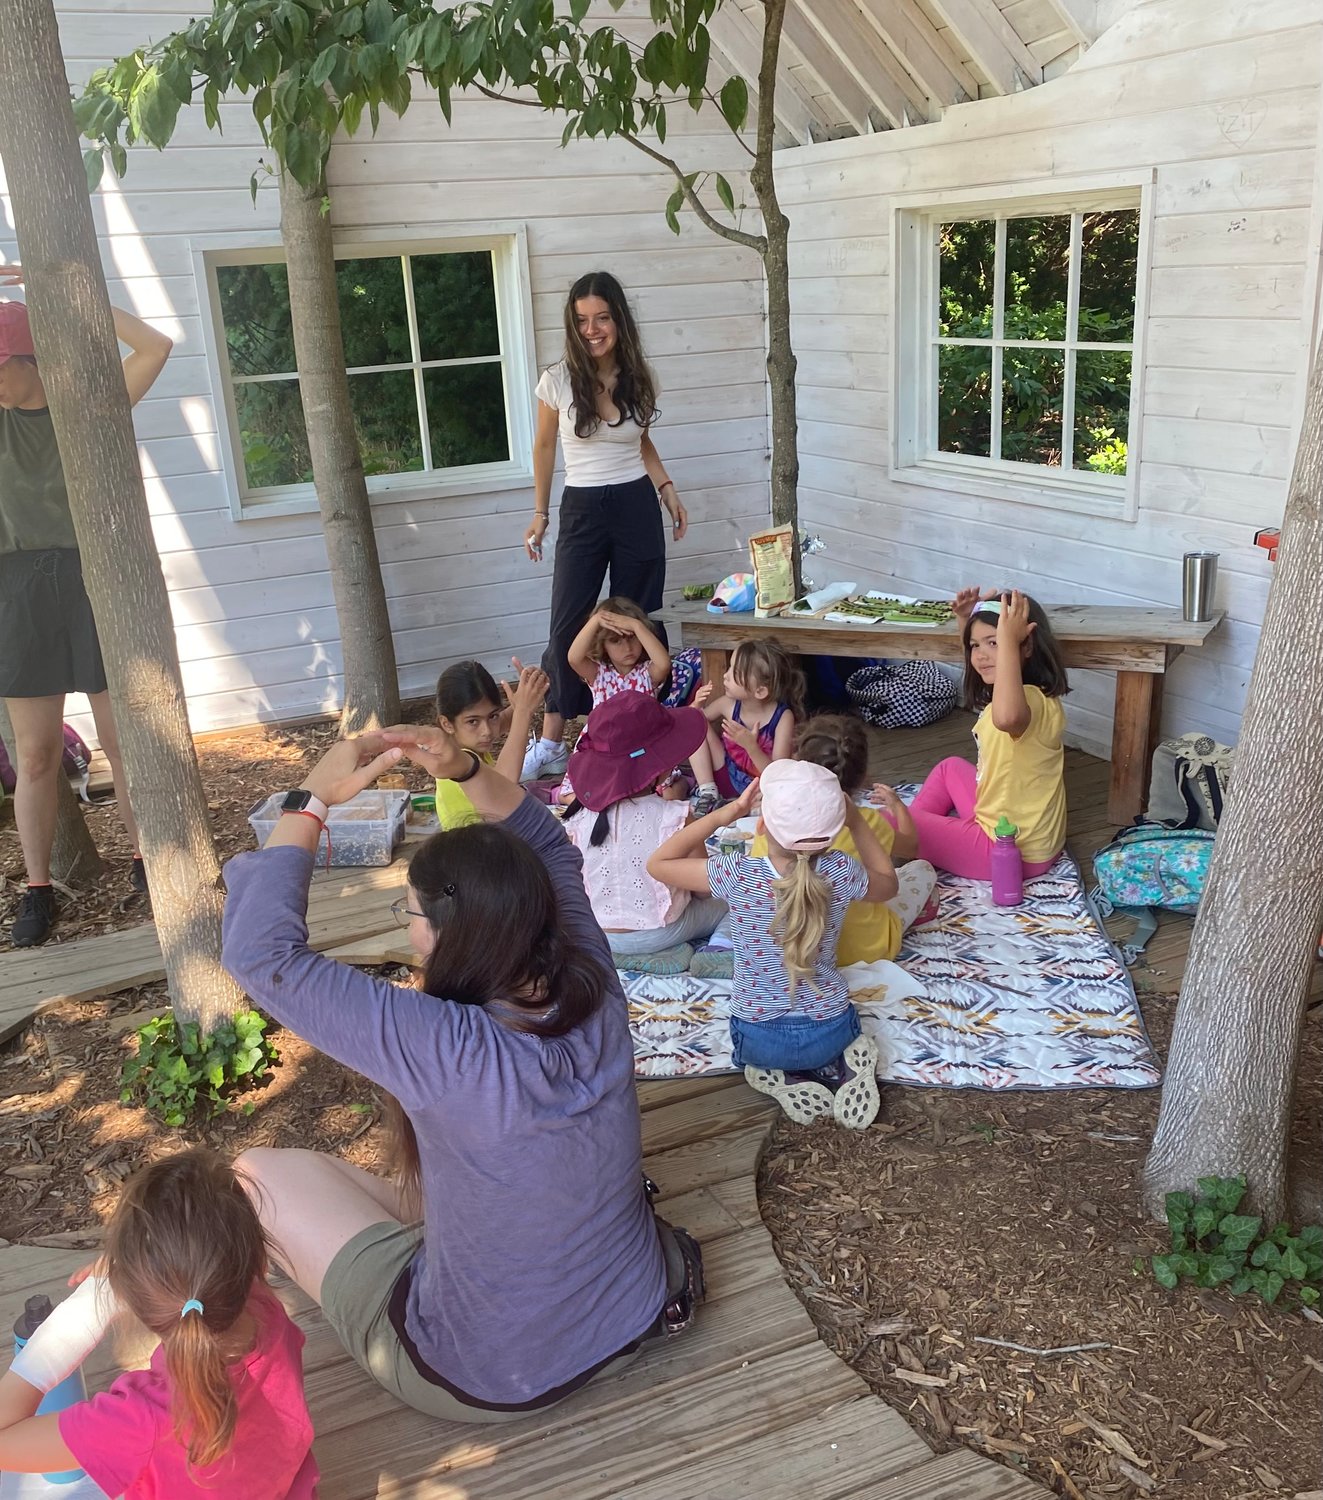 The Sparrows group sang a blessing song before eating their “ants on a log” snack consisting of celery, which they chopped themselves at Orkestai farm, raisins and peanut butter.